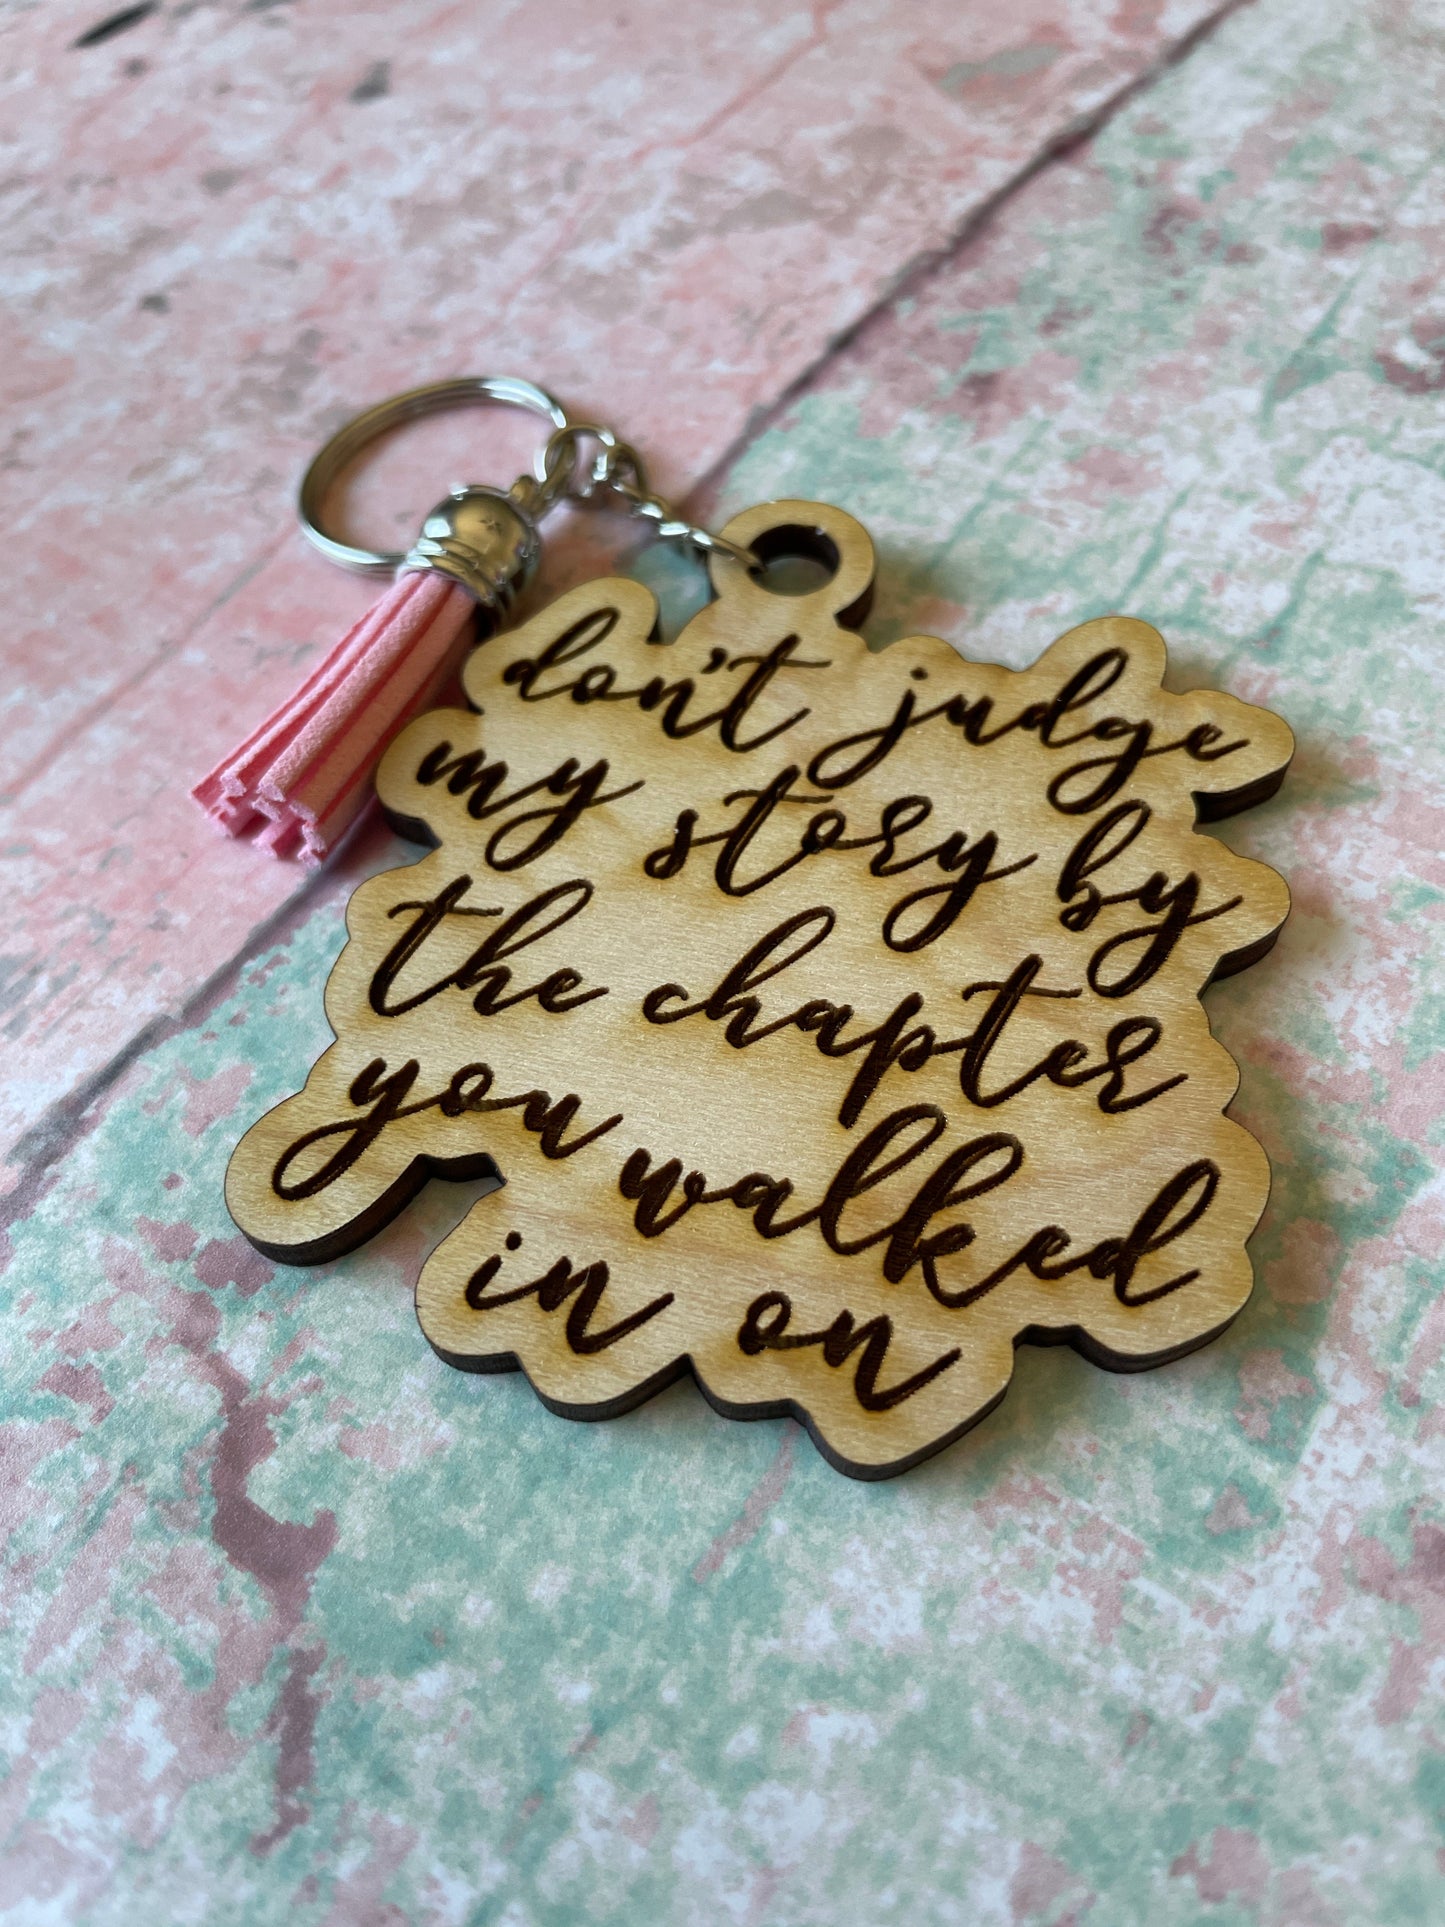 Don't judge a story wood keychain